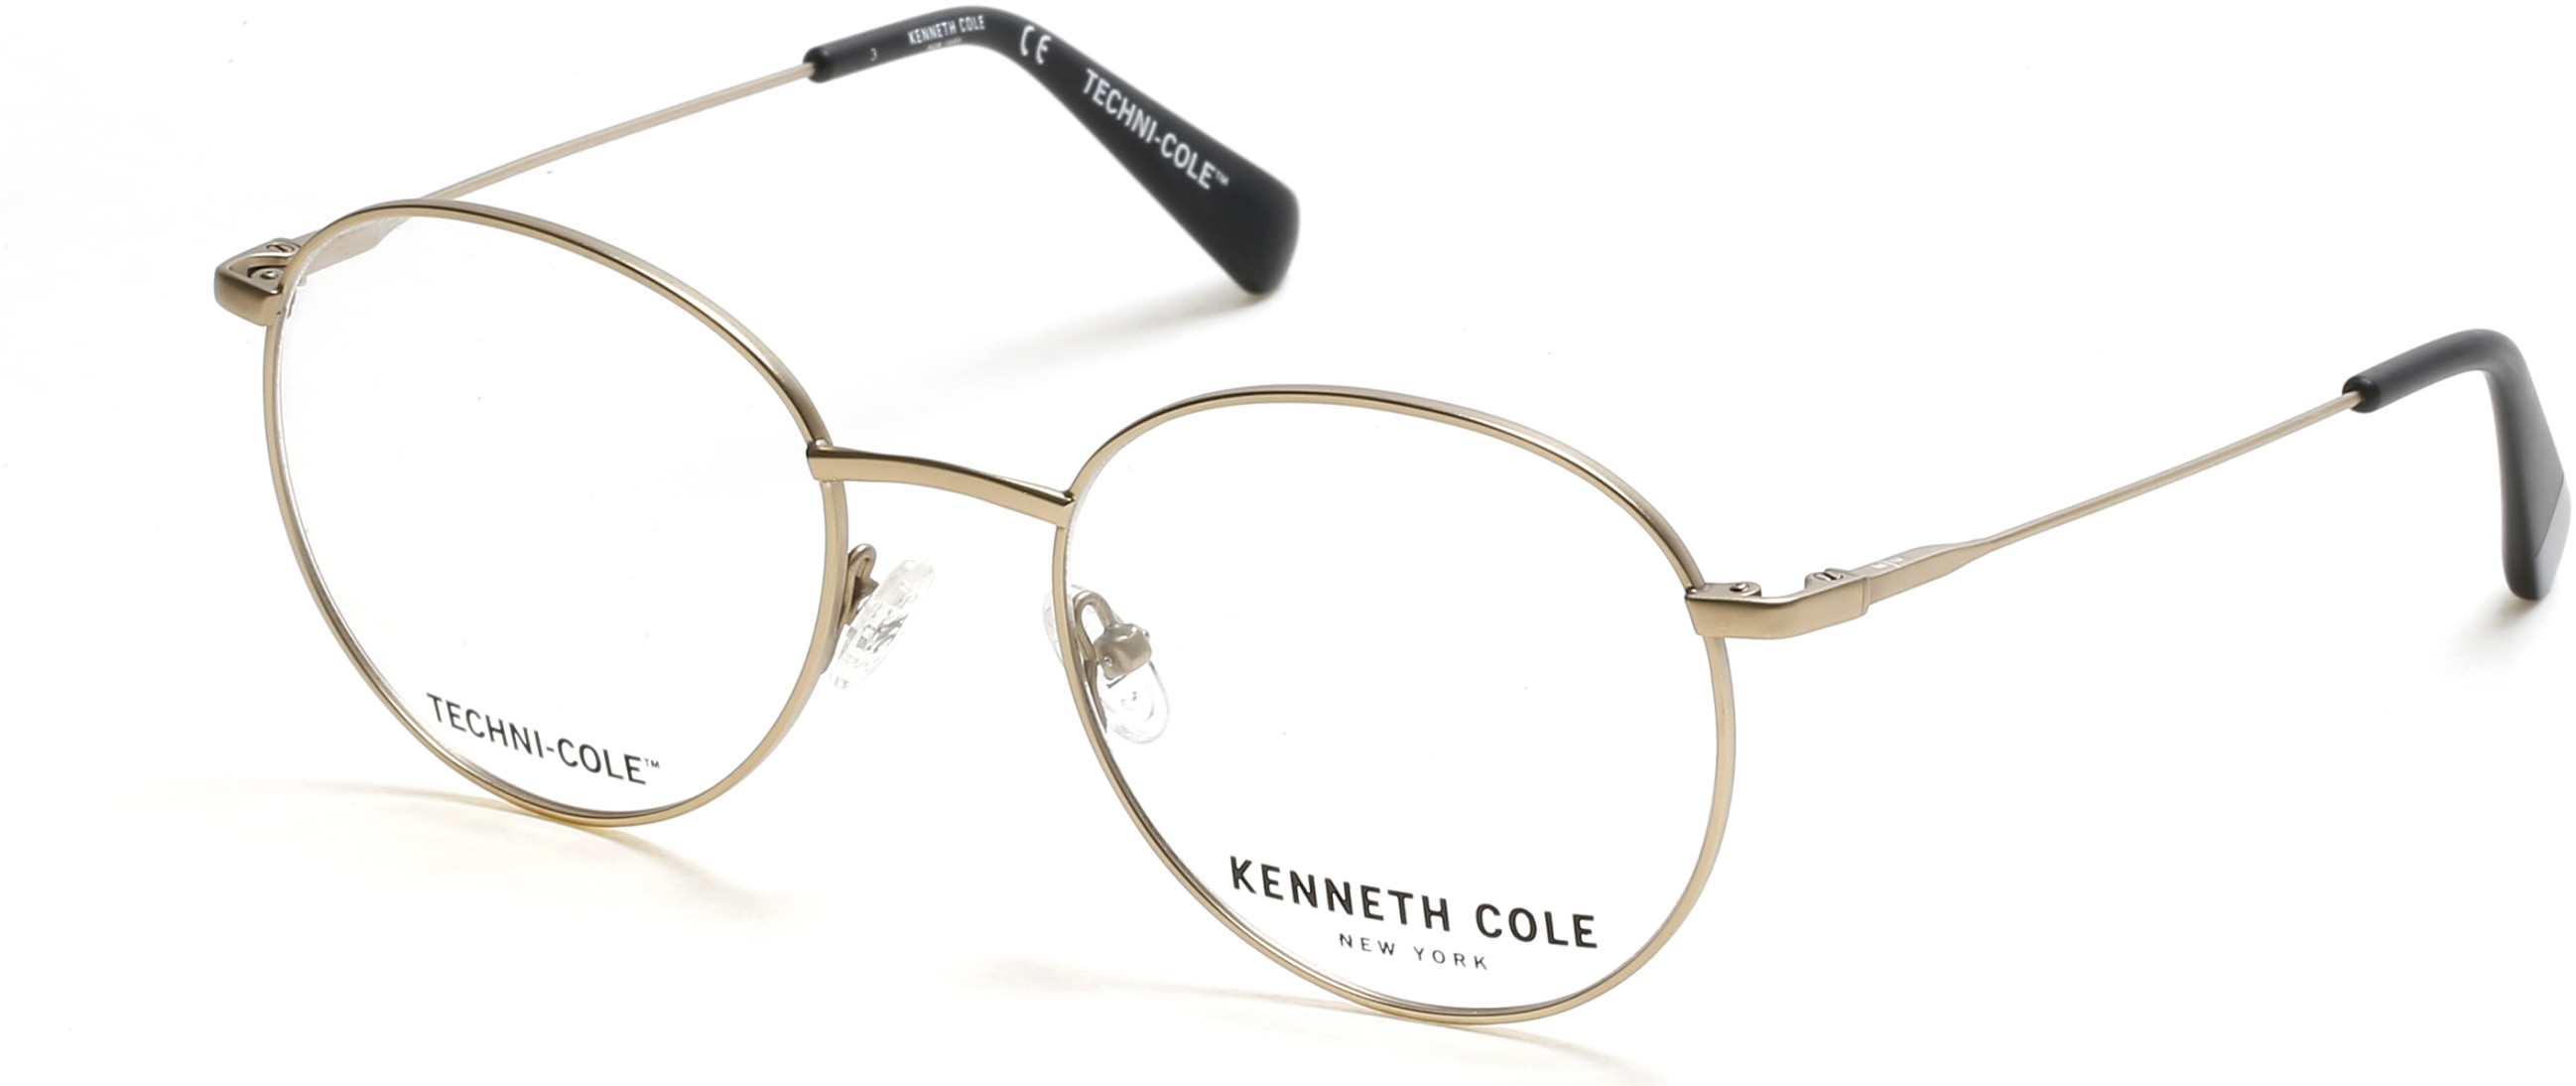 KENNETH COLE NY 0332 032